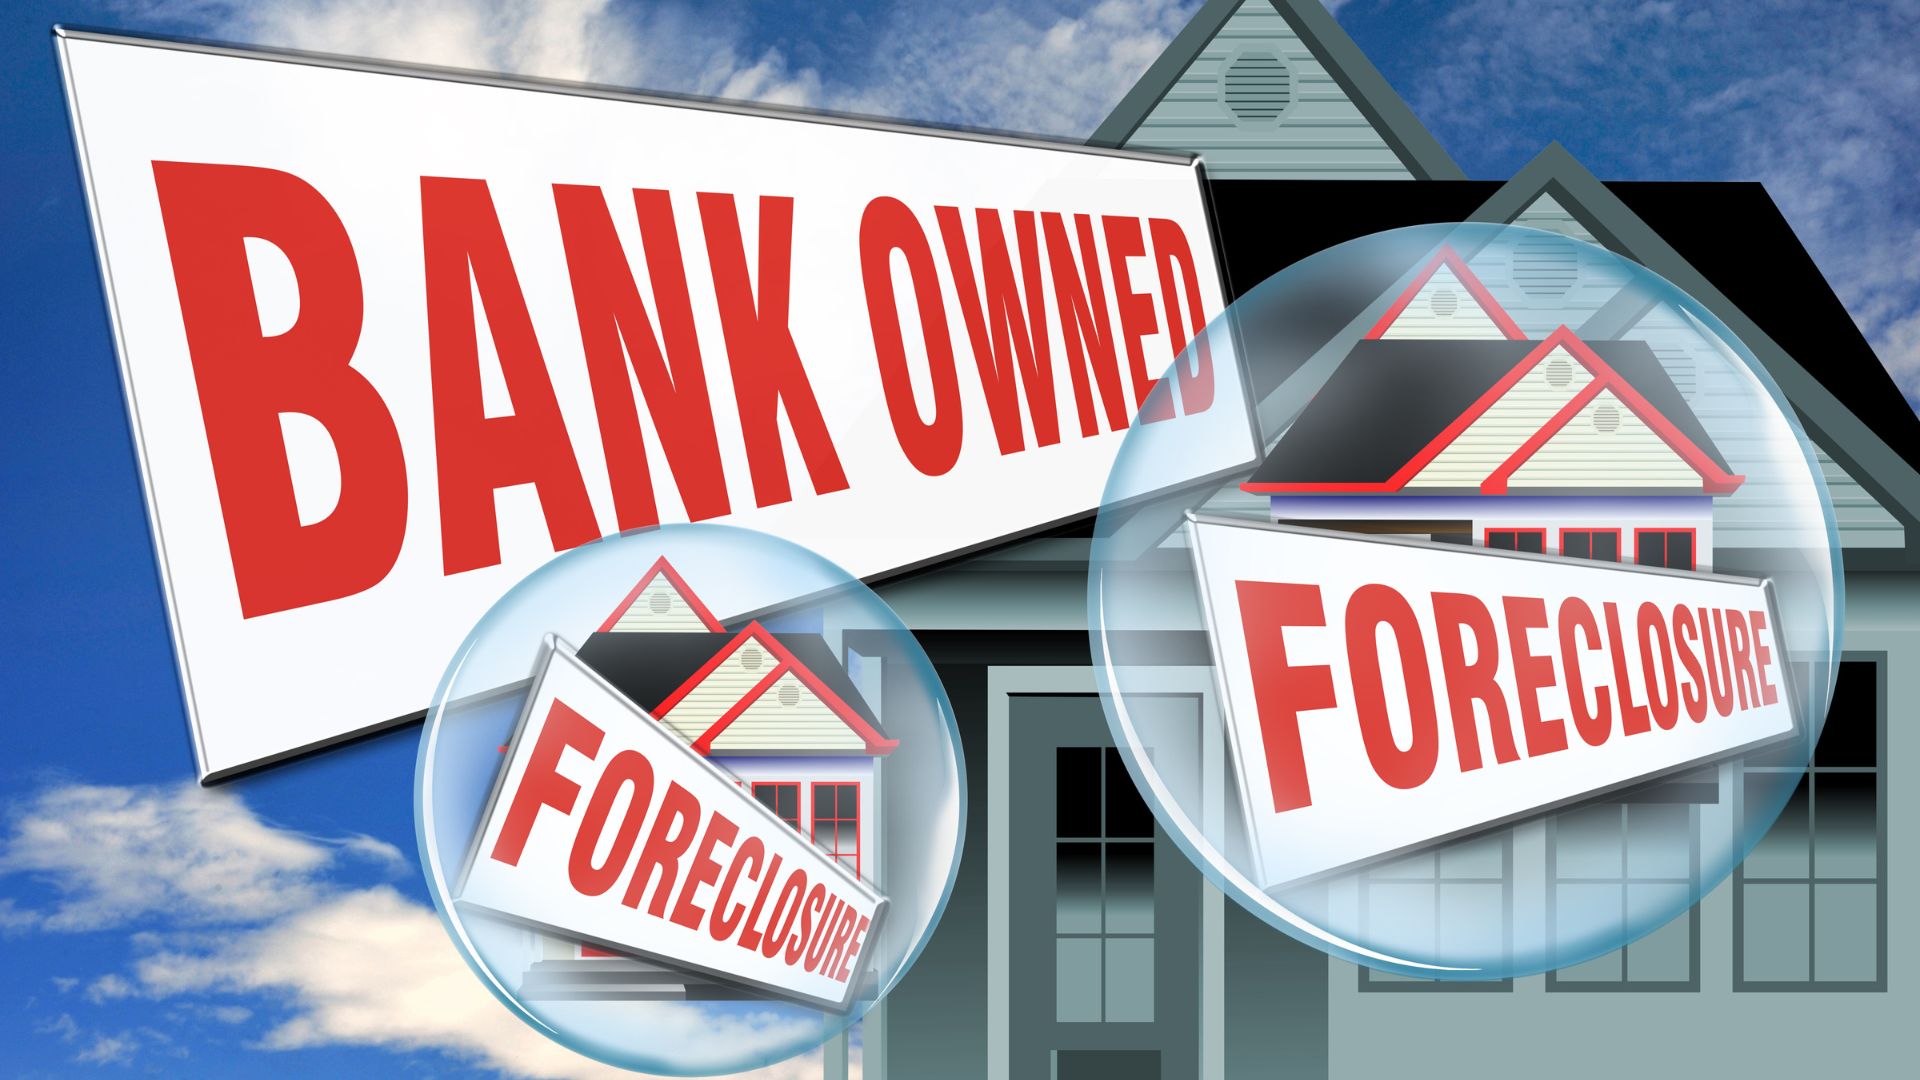 A Guide To Buying Foreclosures